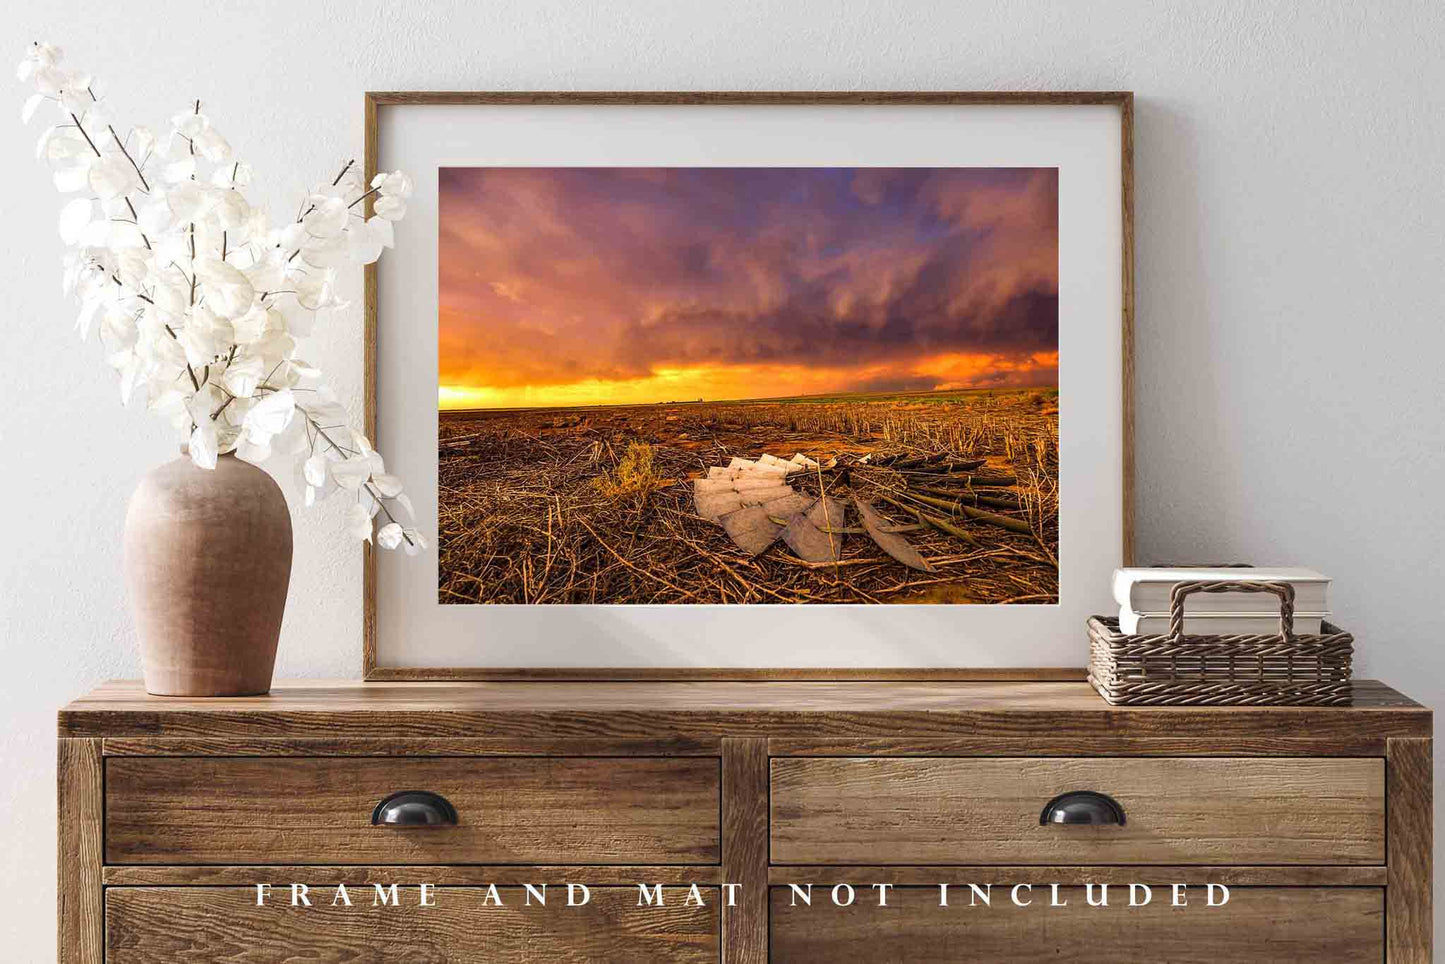 Country Photography Print - Kansas Wall Art Picture of Windmill Turbine in Field on Stormy Evening Farm Photo Farmhouse Decor 5x7 to 40x60